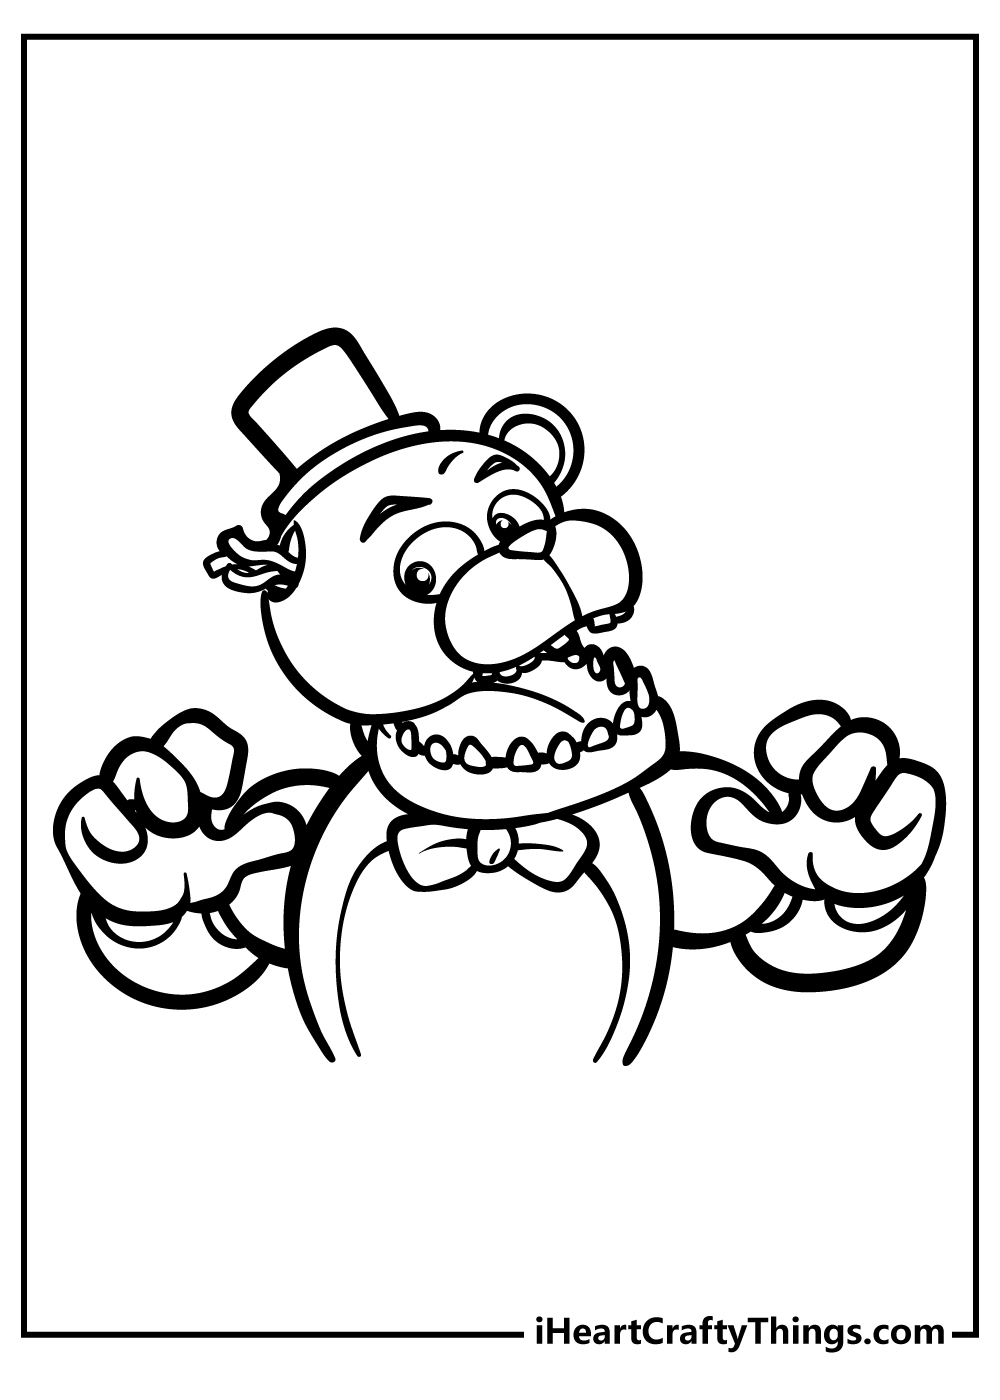 Five Nights At Freddy’s coloring pages free printable